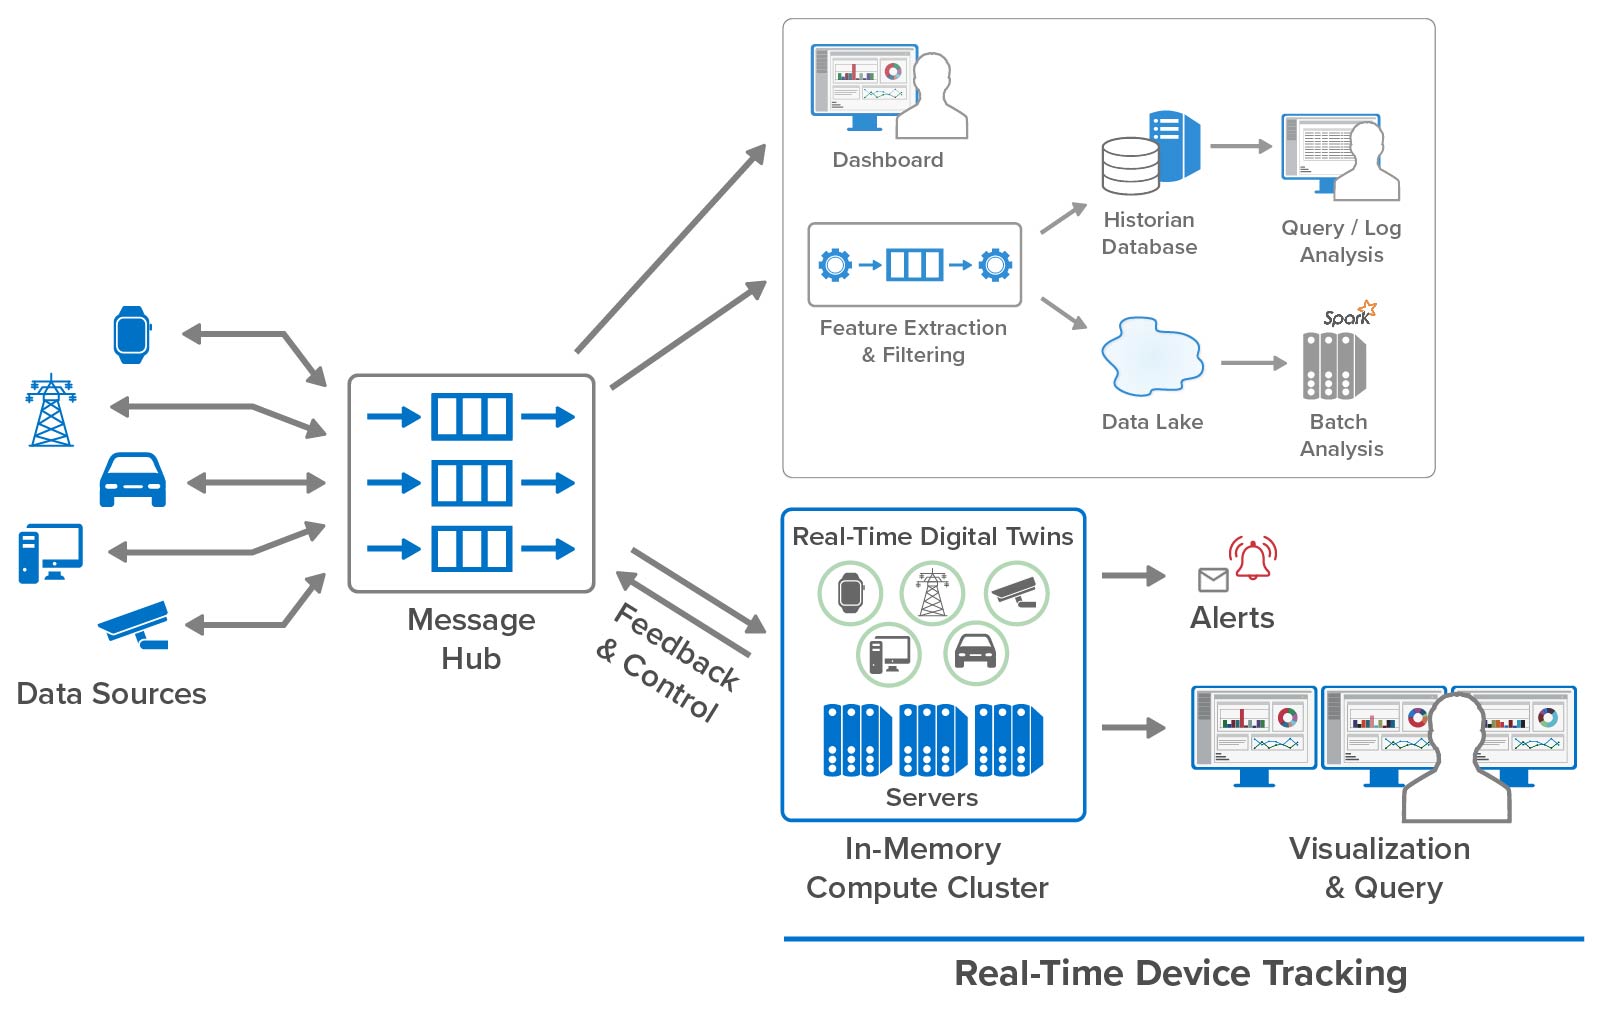 Real-time device tracking uses digital twins running in an in-memory compute cluster.